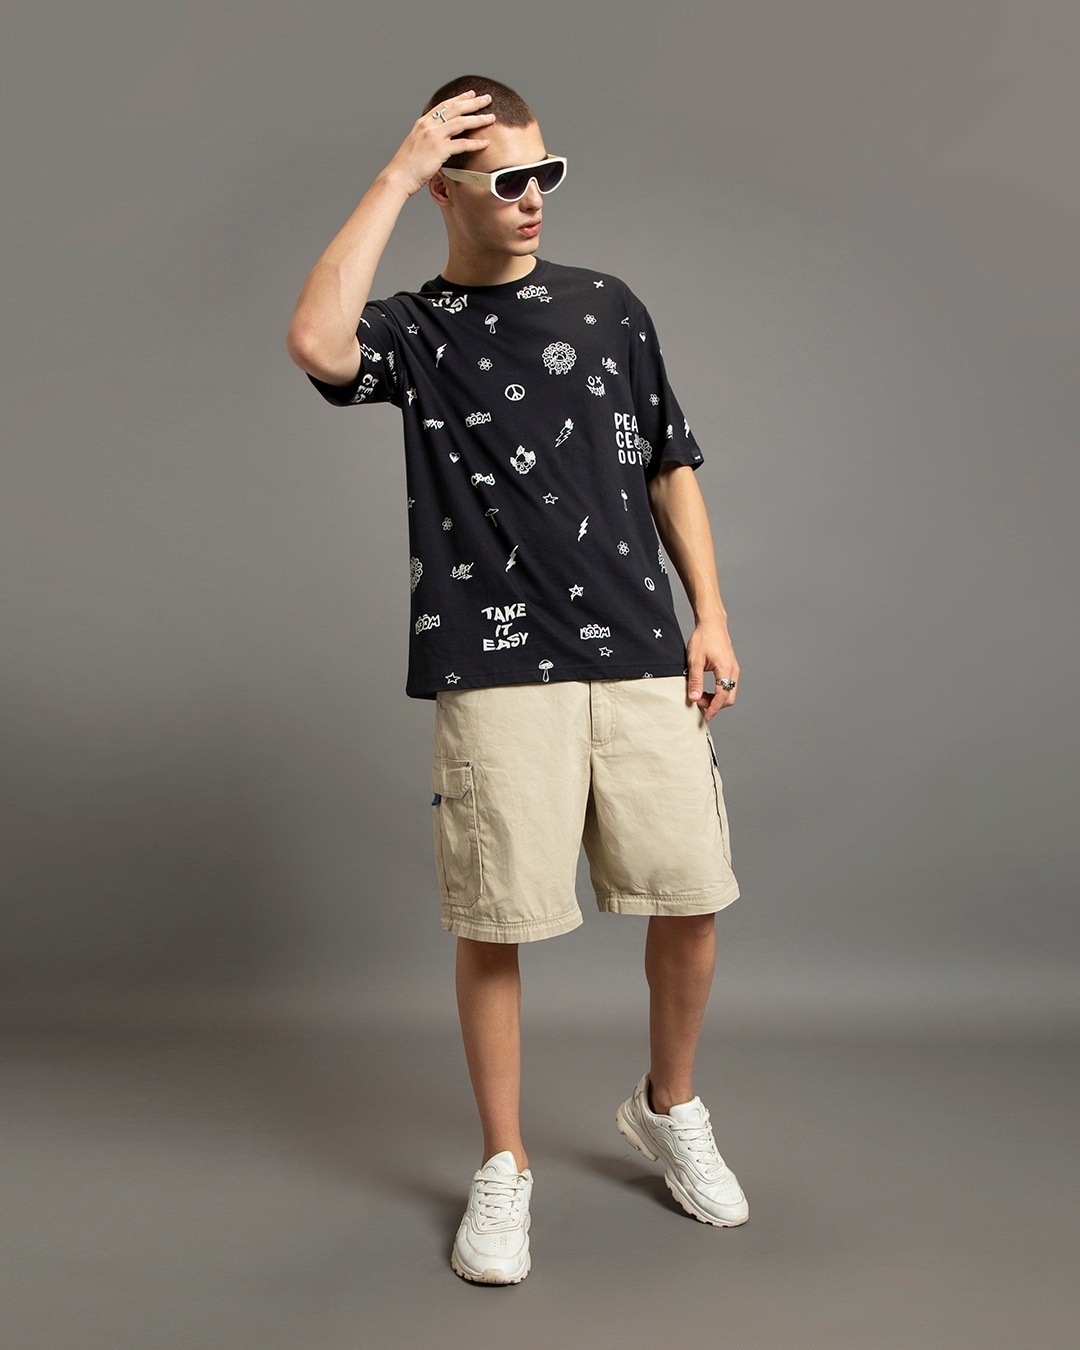 stylish black printed t-shirt with white sneaker